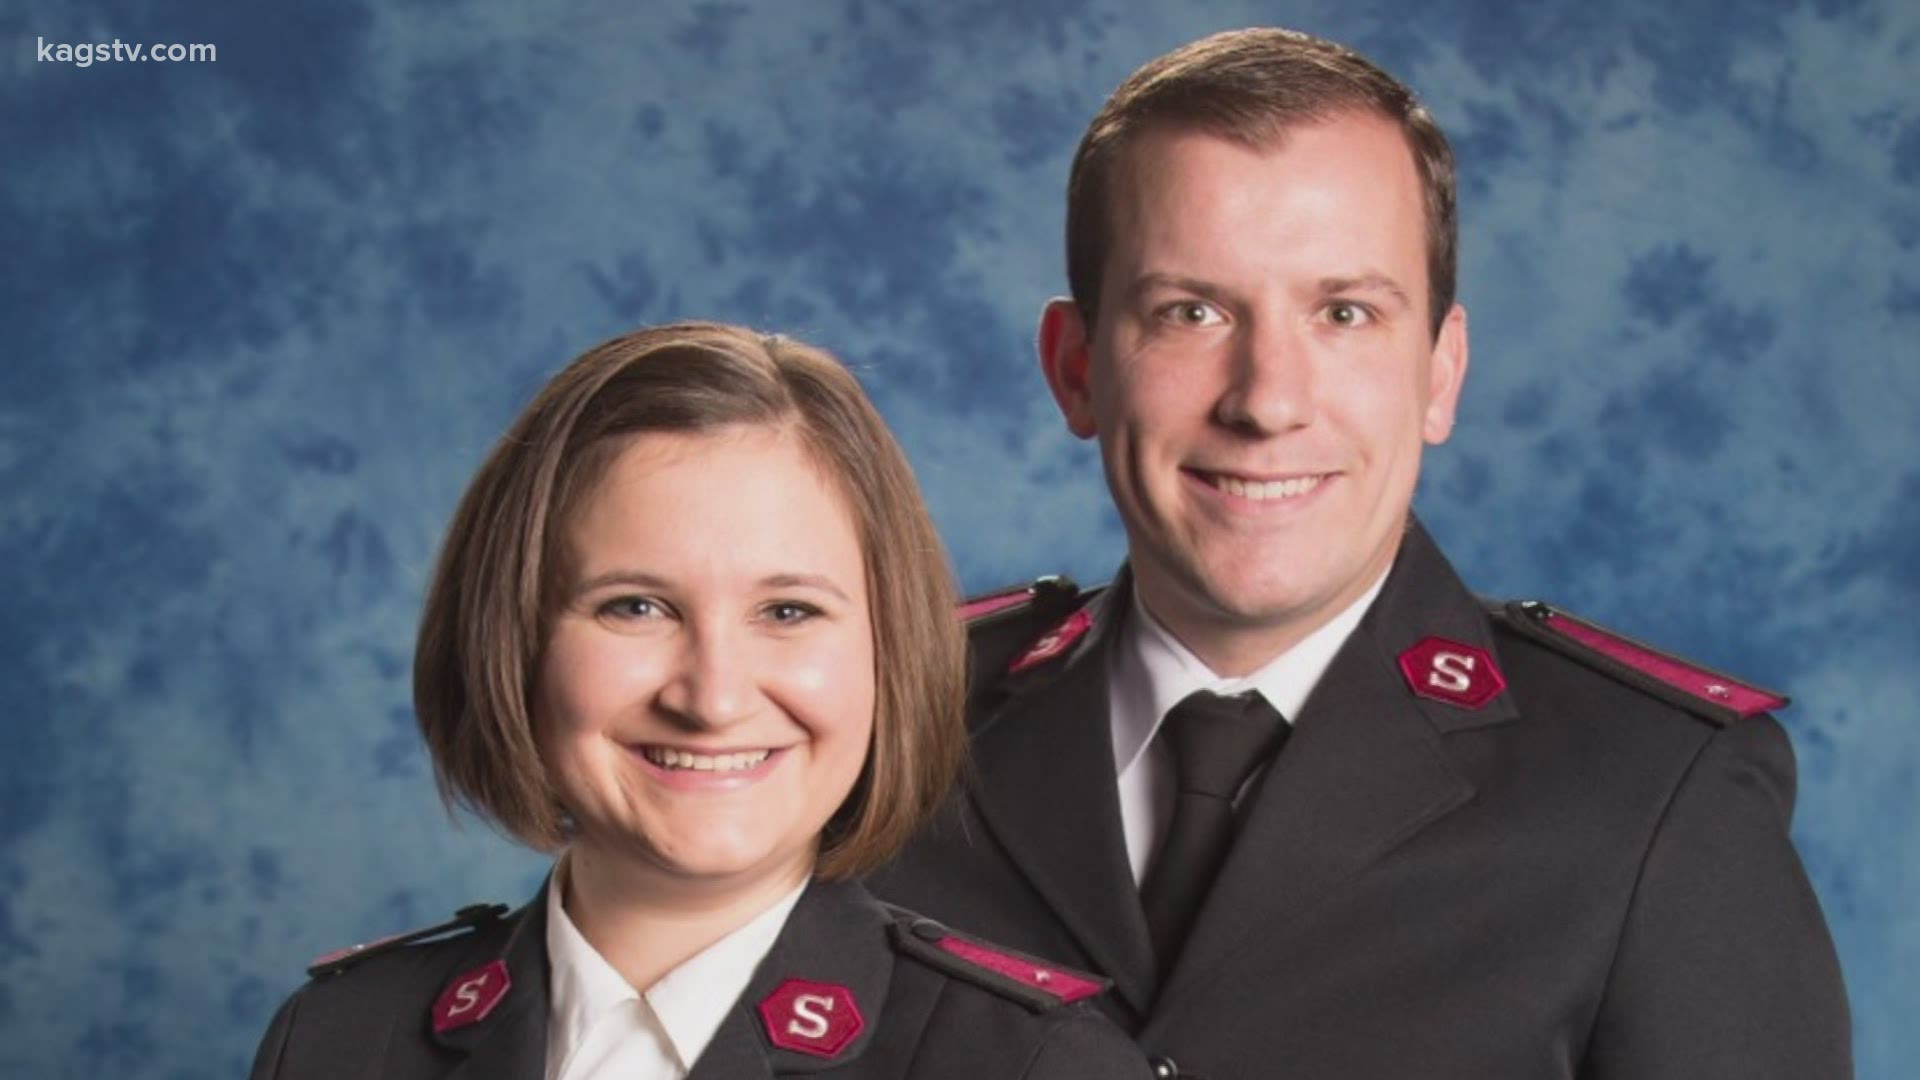 The couple grew up with the Salvation Army, starting their official journey in service in Arlington. Now, they're excited about their new home in B-CS.